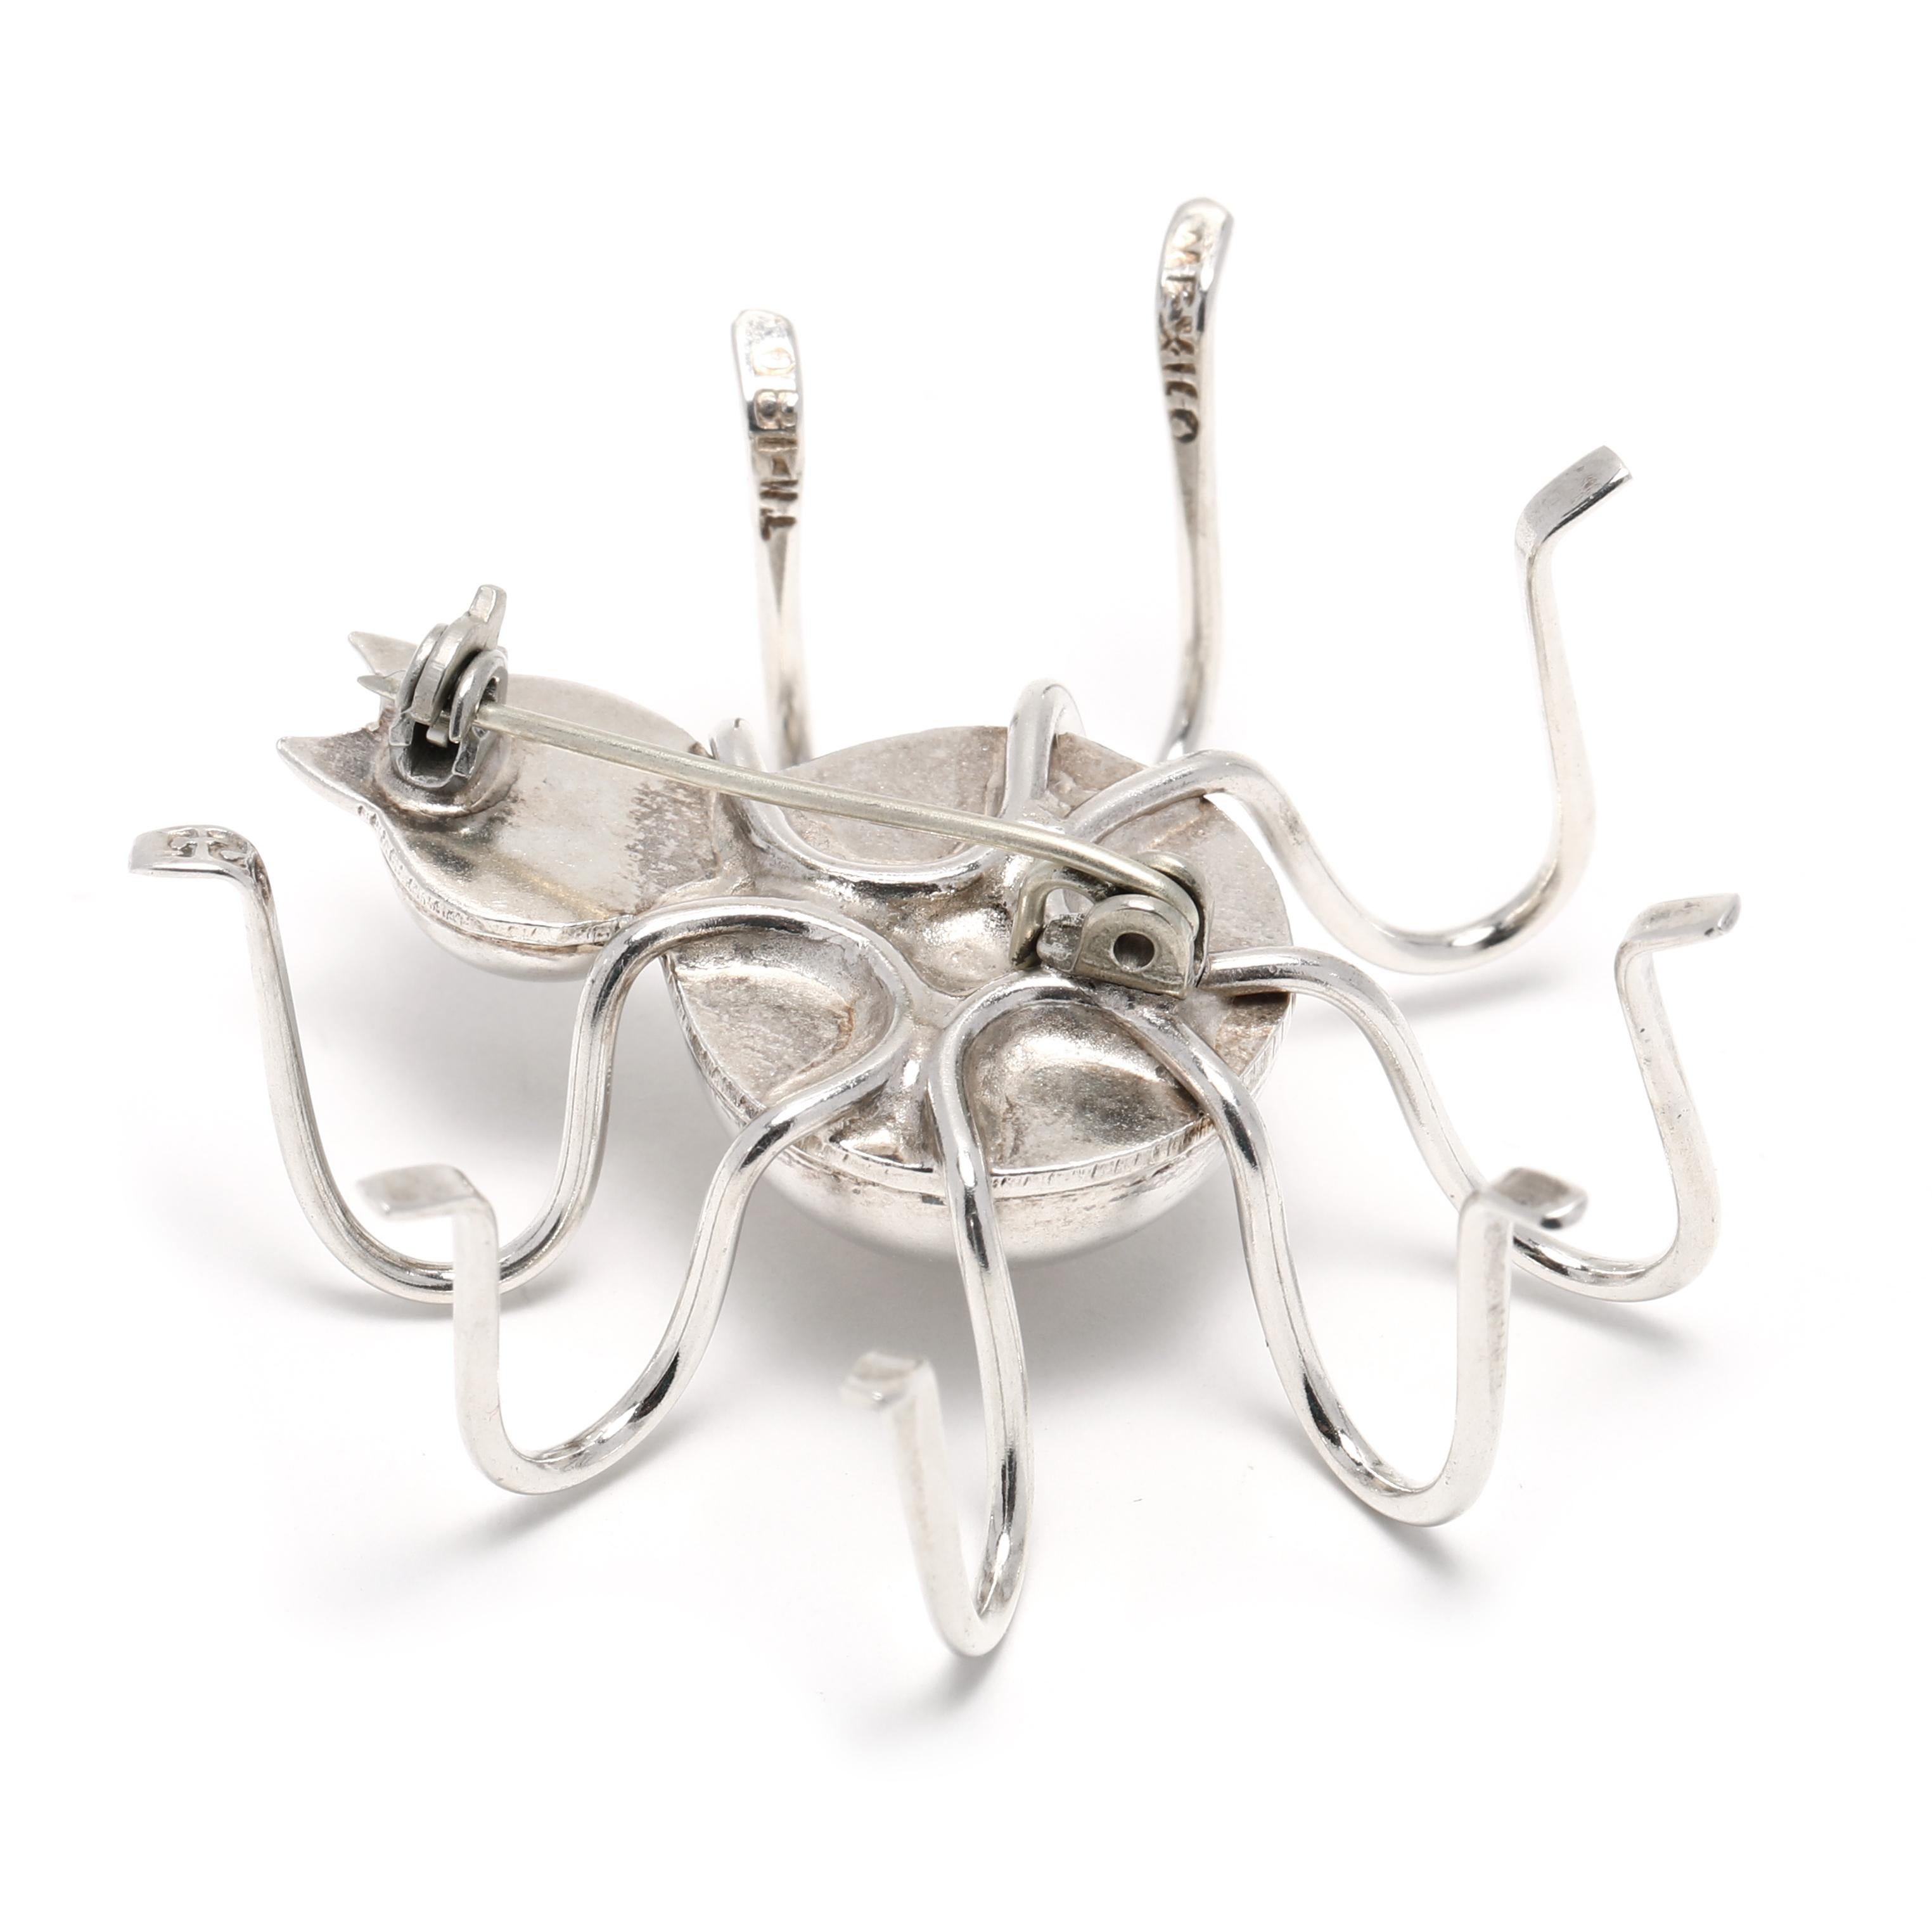 This spooky spider brooch is made from sterling silver and is the perfect addition to any wardrobe! The Mexican large spider brooch measures 2 inches in length and is sure to get attention. Its intricate design and highly detailed construction make